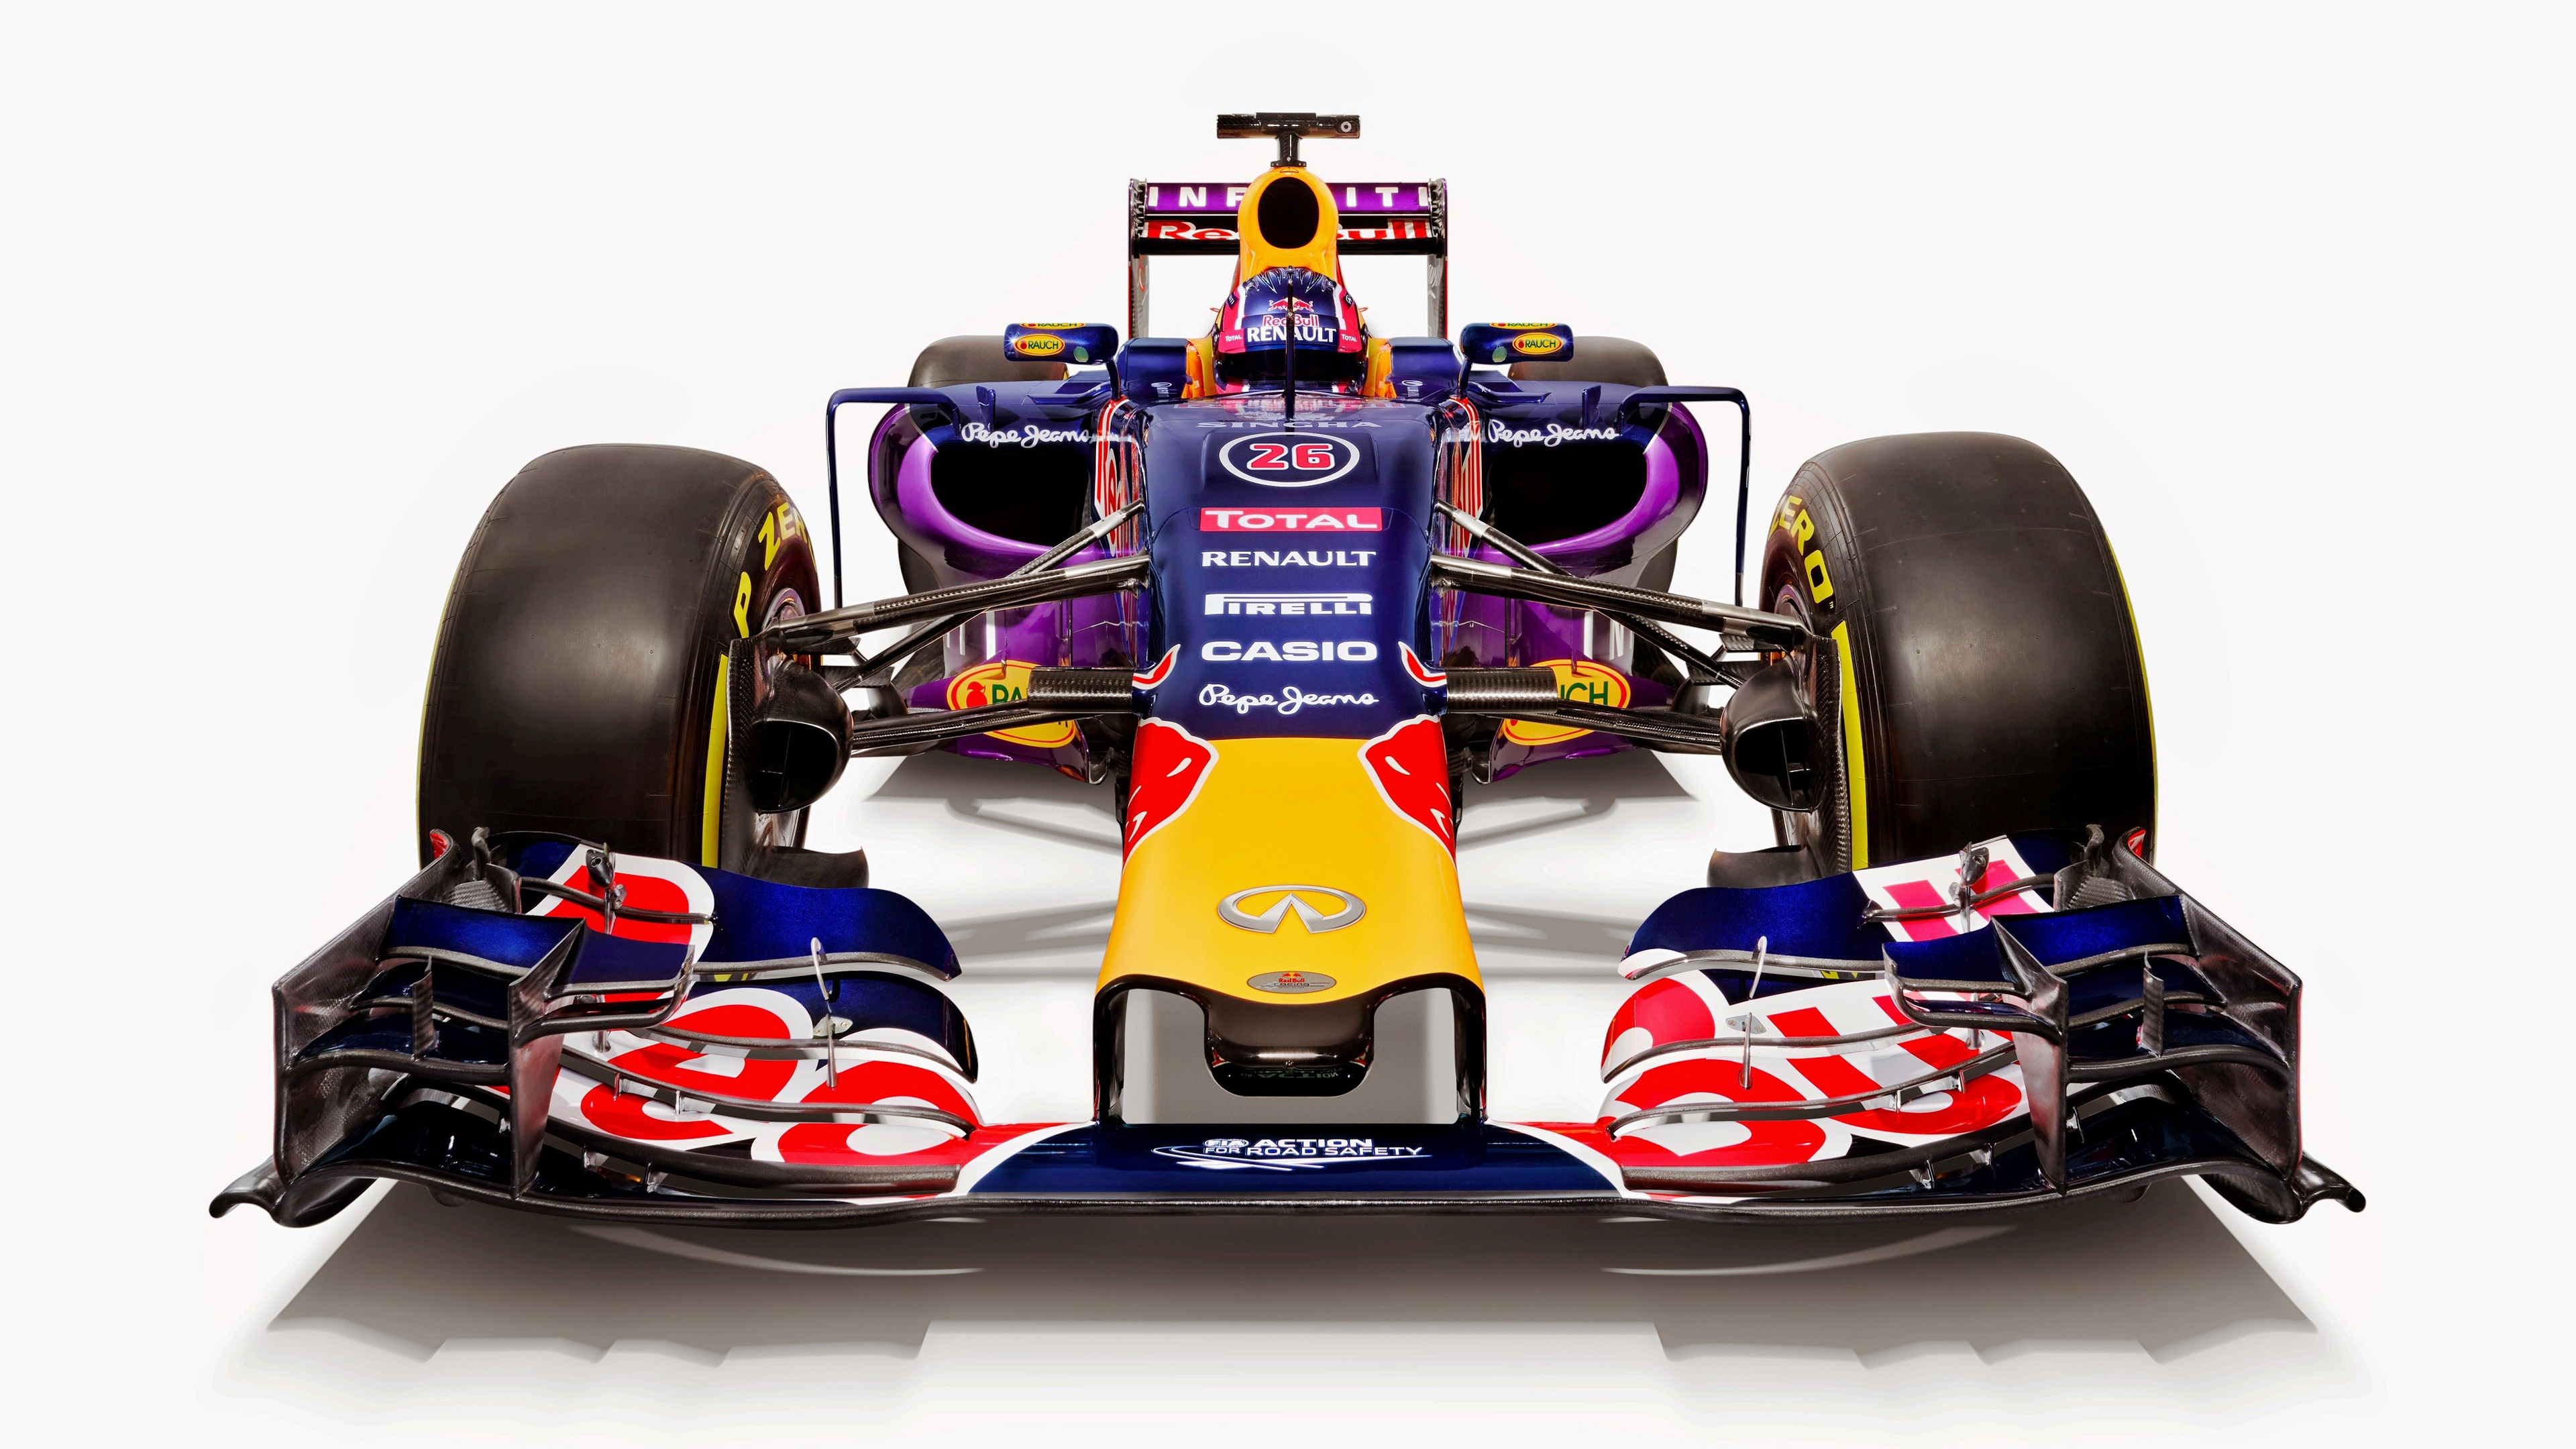 F1 Red Bull Car Images From The Back - HD Wallpaper 